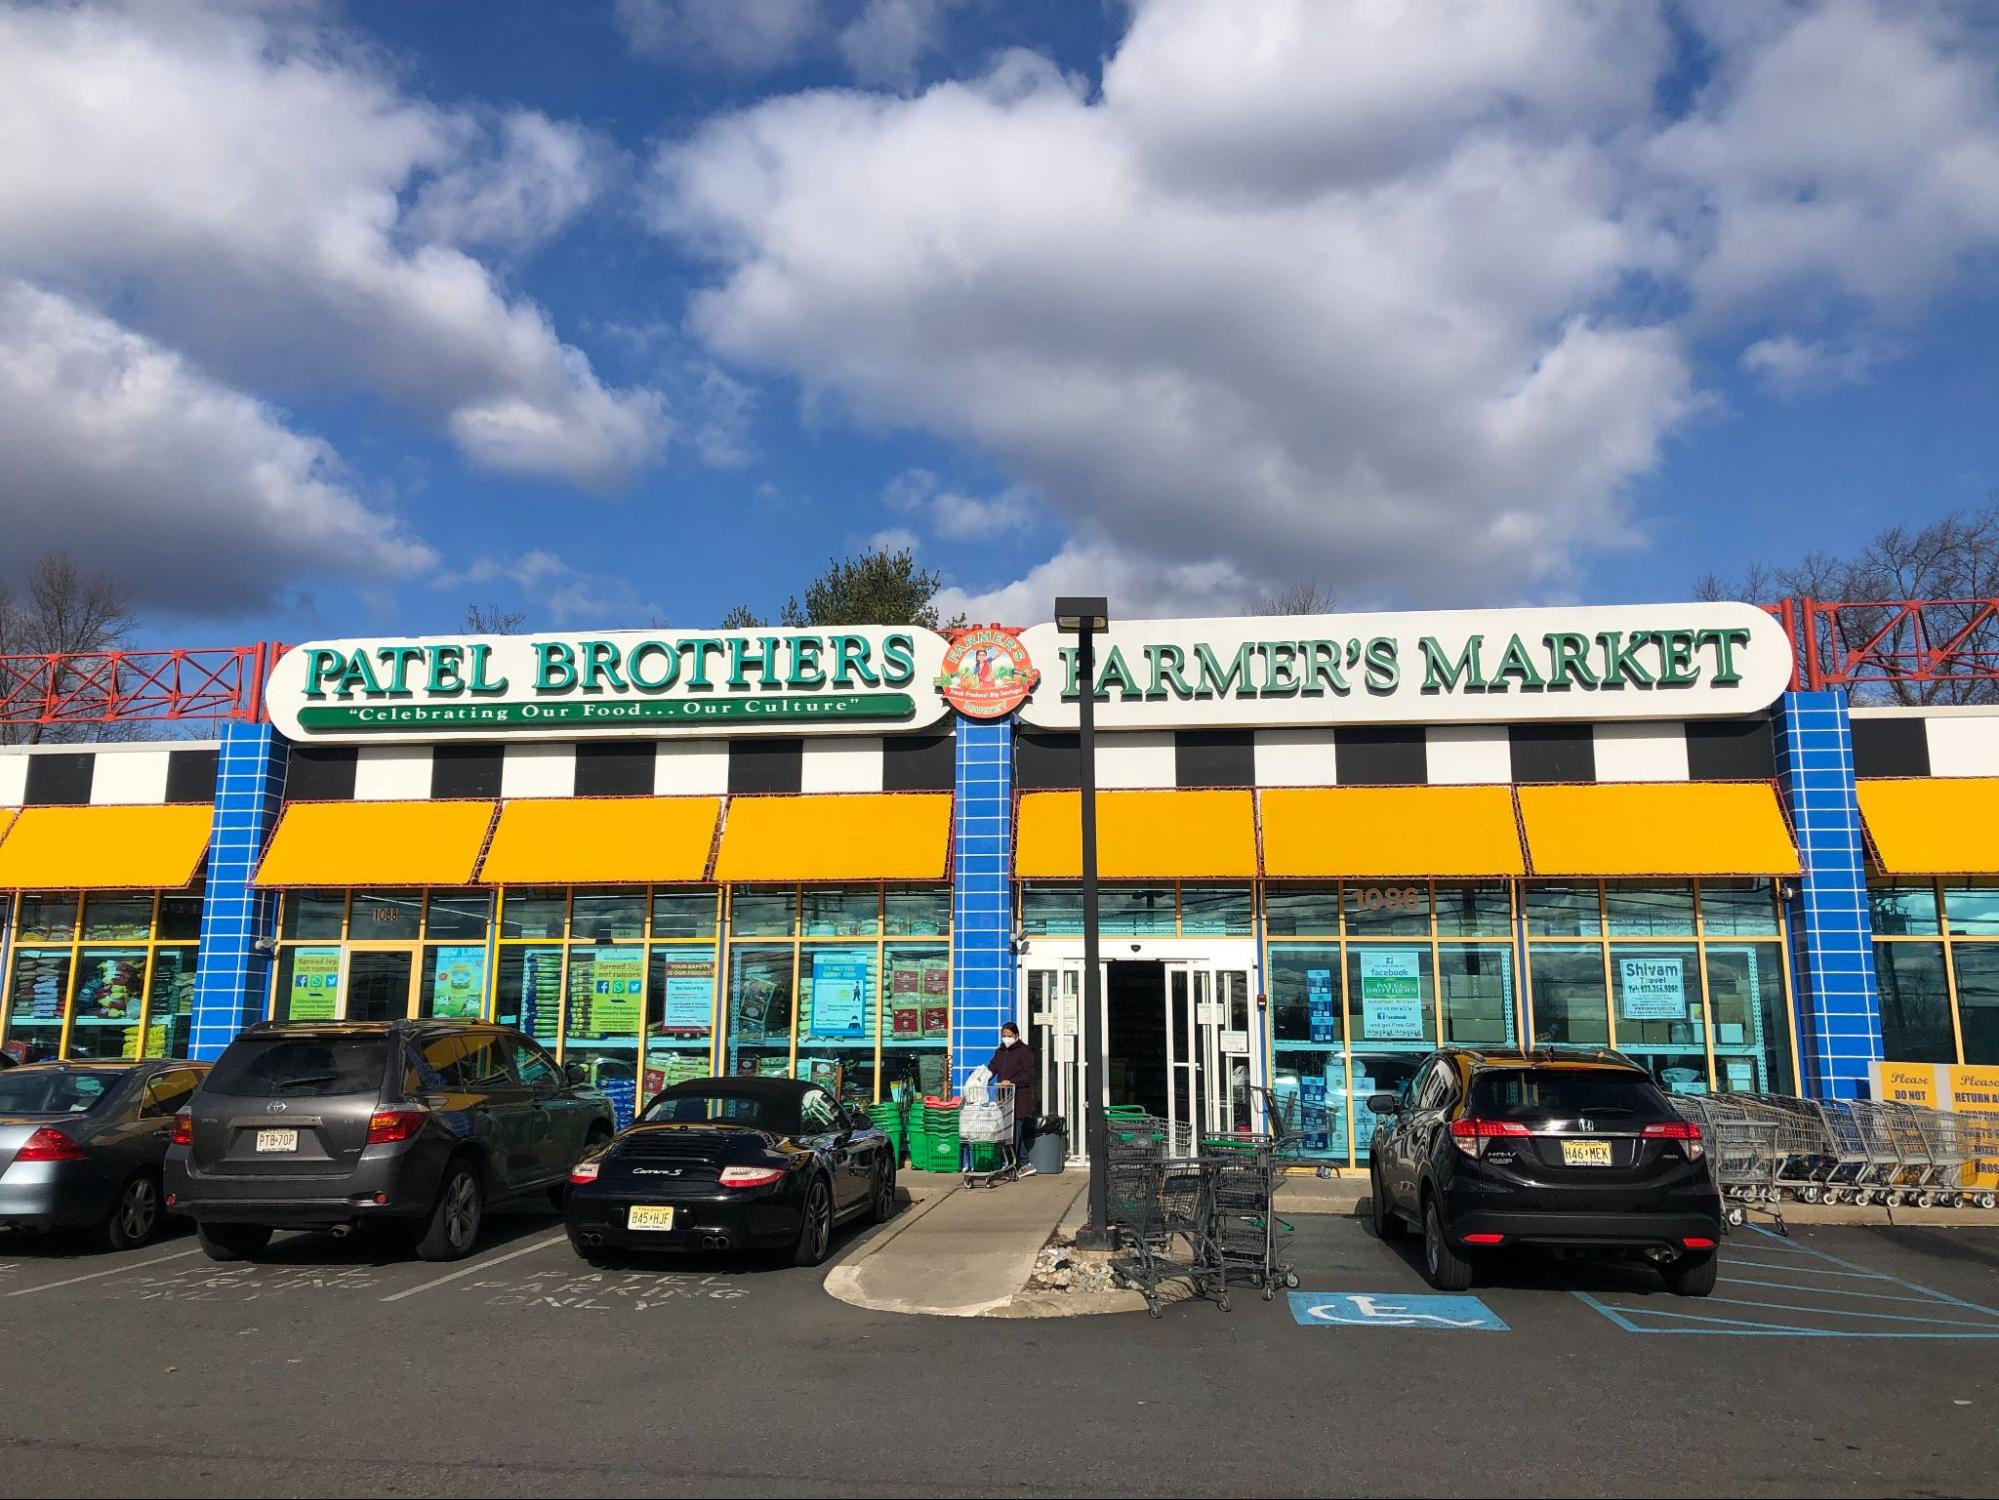 Patel Brothers, an Indian grocery store in Massachusetts